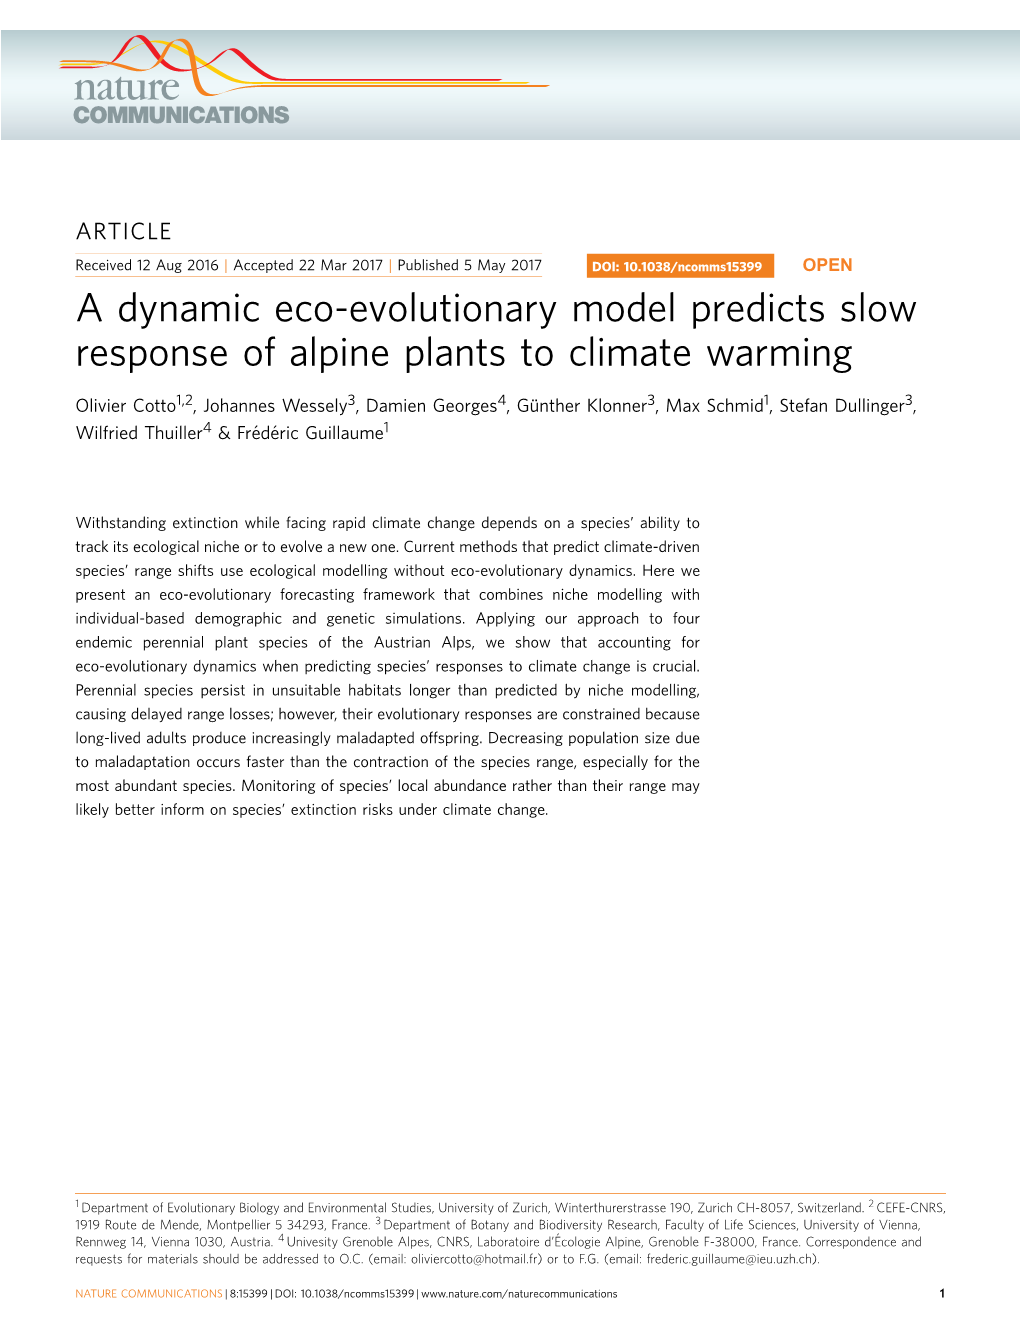 A Dynamic Eco-Evolutionary Model Predicts Slow Response of Alpine Plants to Climate Warming